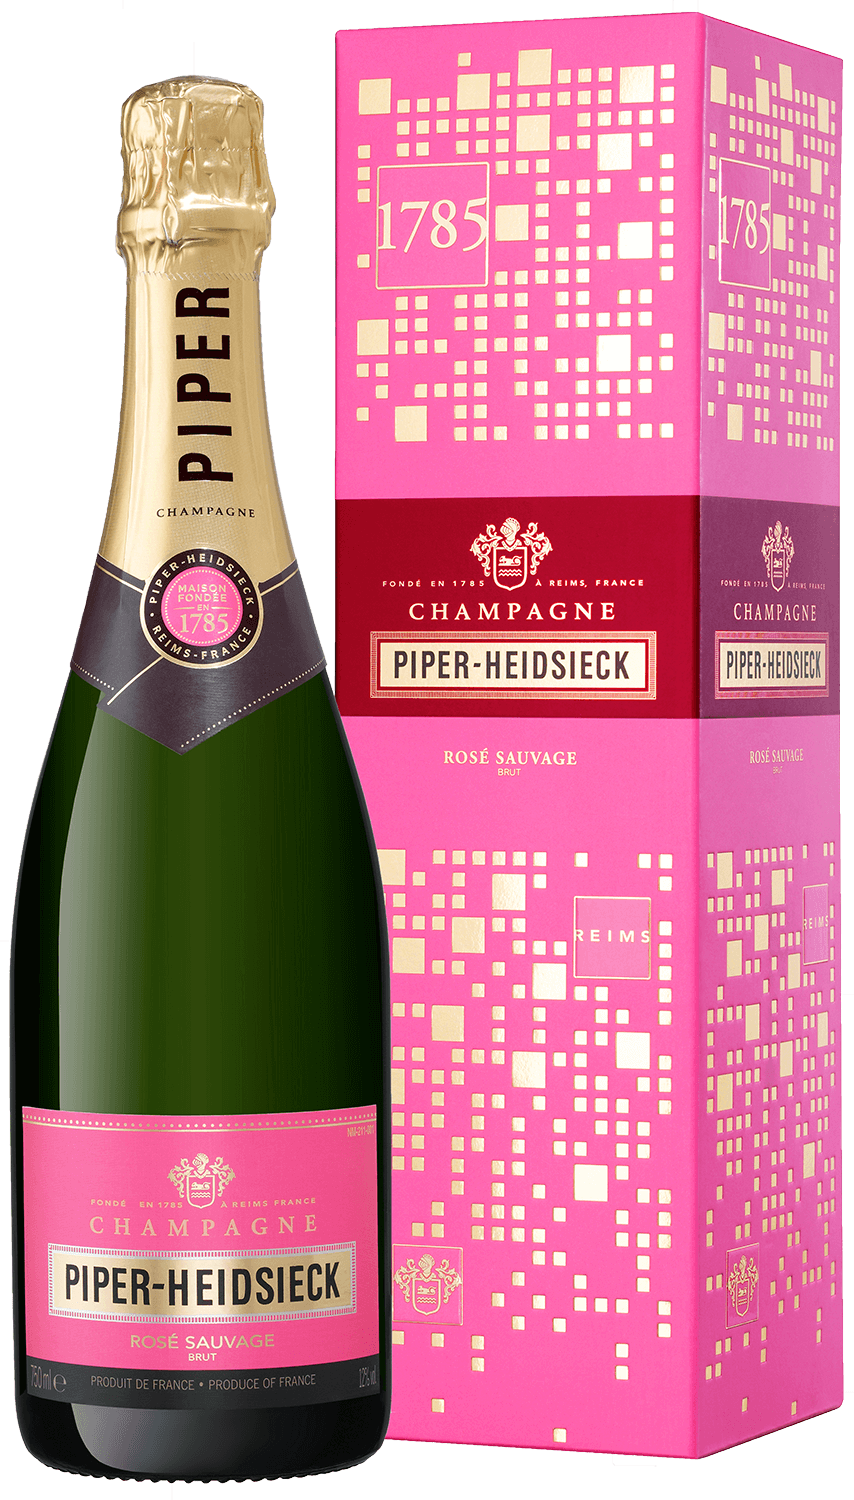 Piper-Heidsieck Sauvage Rose Brut Champagne AOC (gift box) piper heidsieck brut champagne aoc